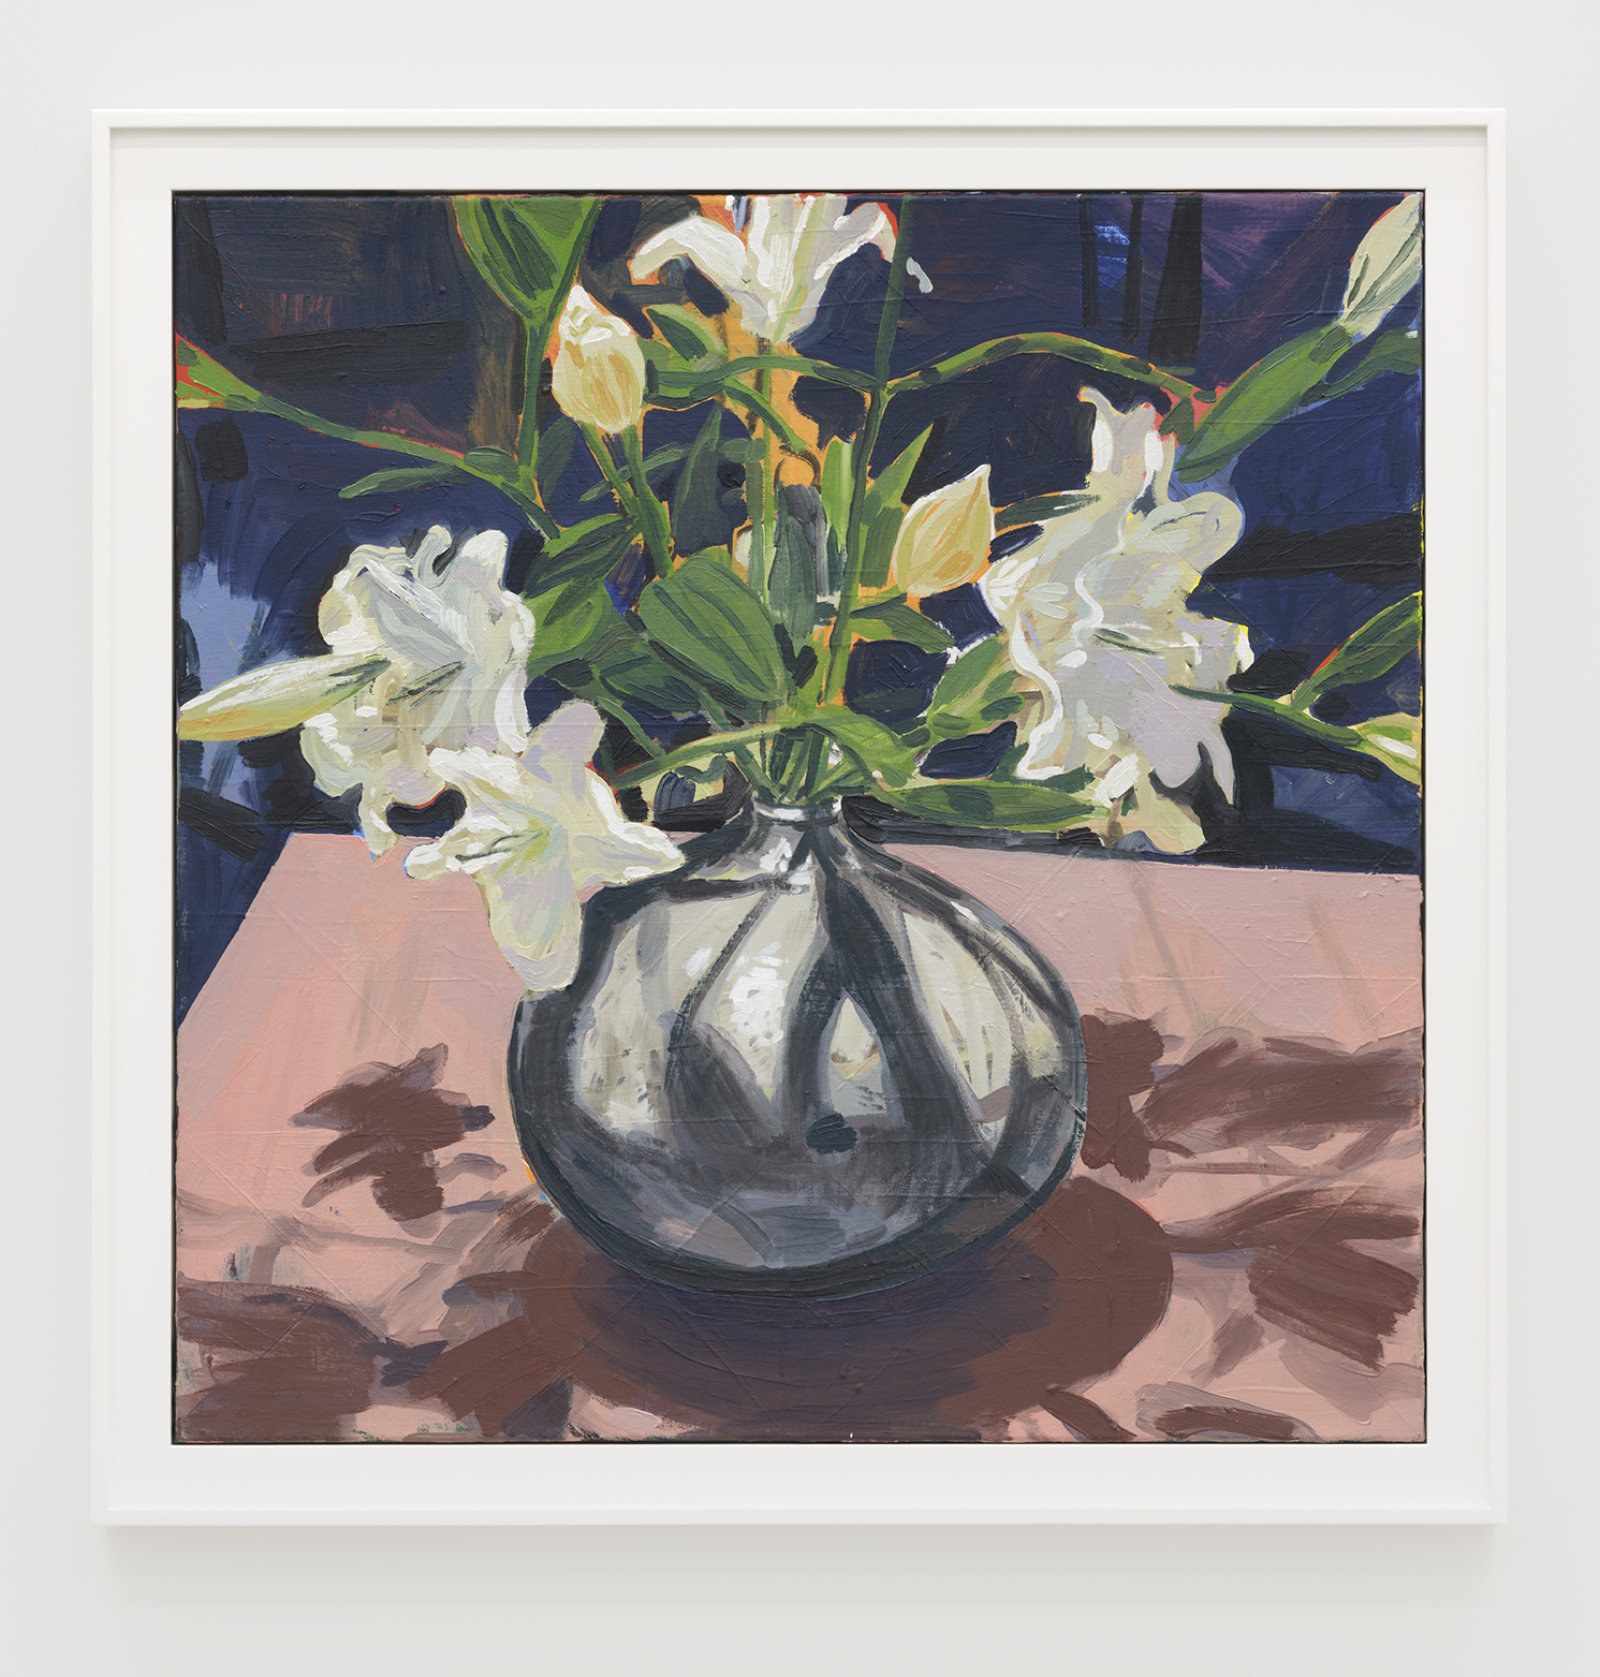 Damian Moppett, Lilies (Pink), 2020, oil on canvas, 34 x 34 in. (86 x 86 cm)